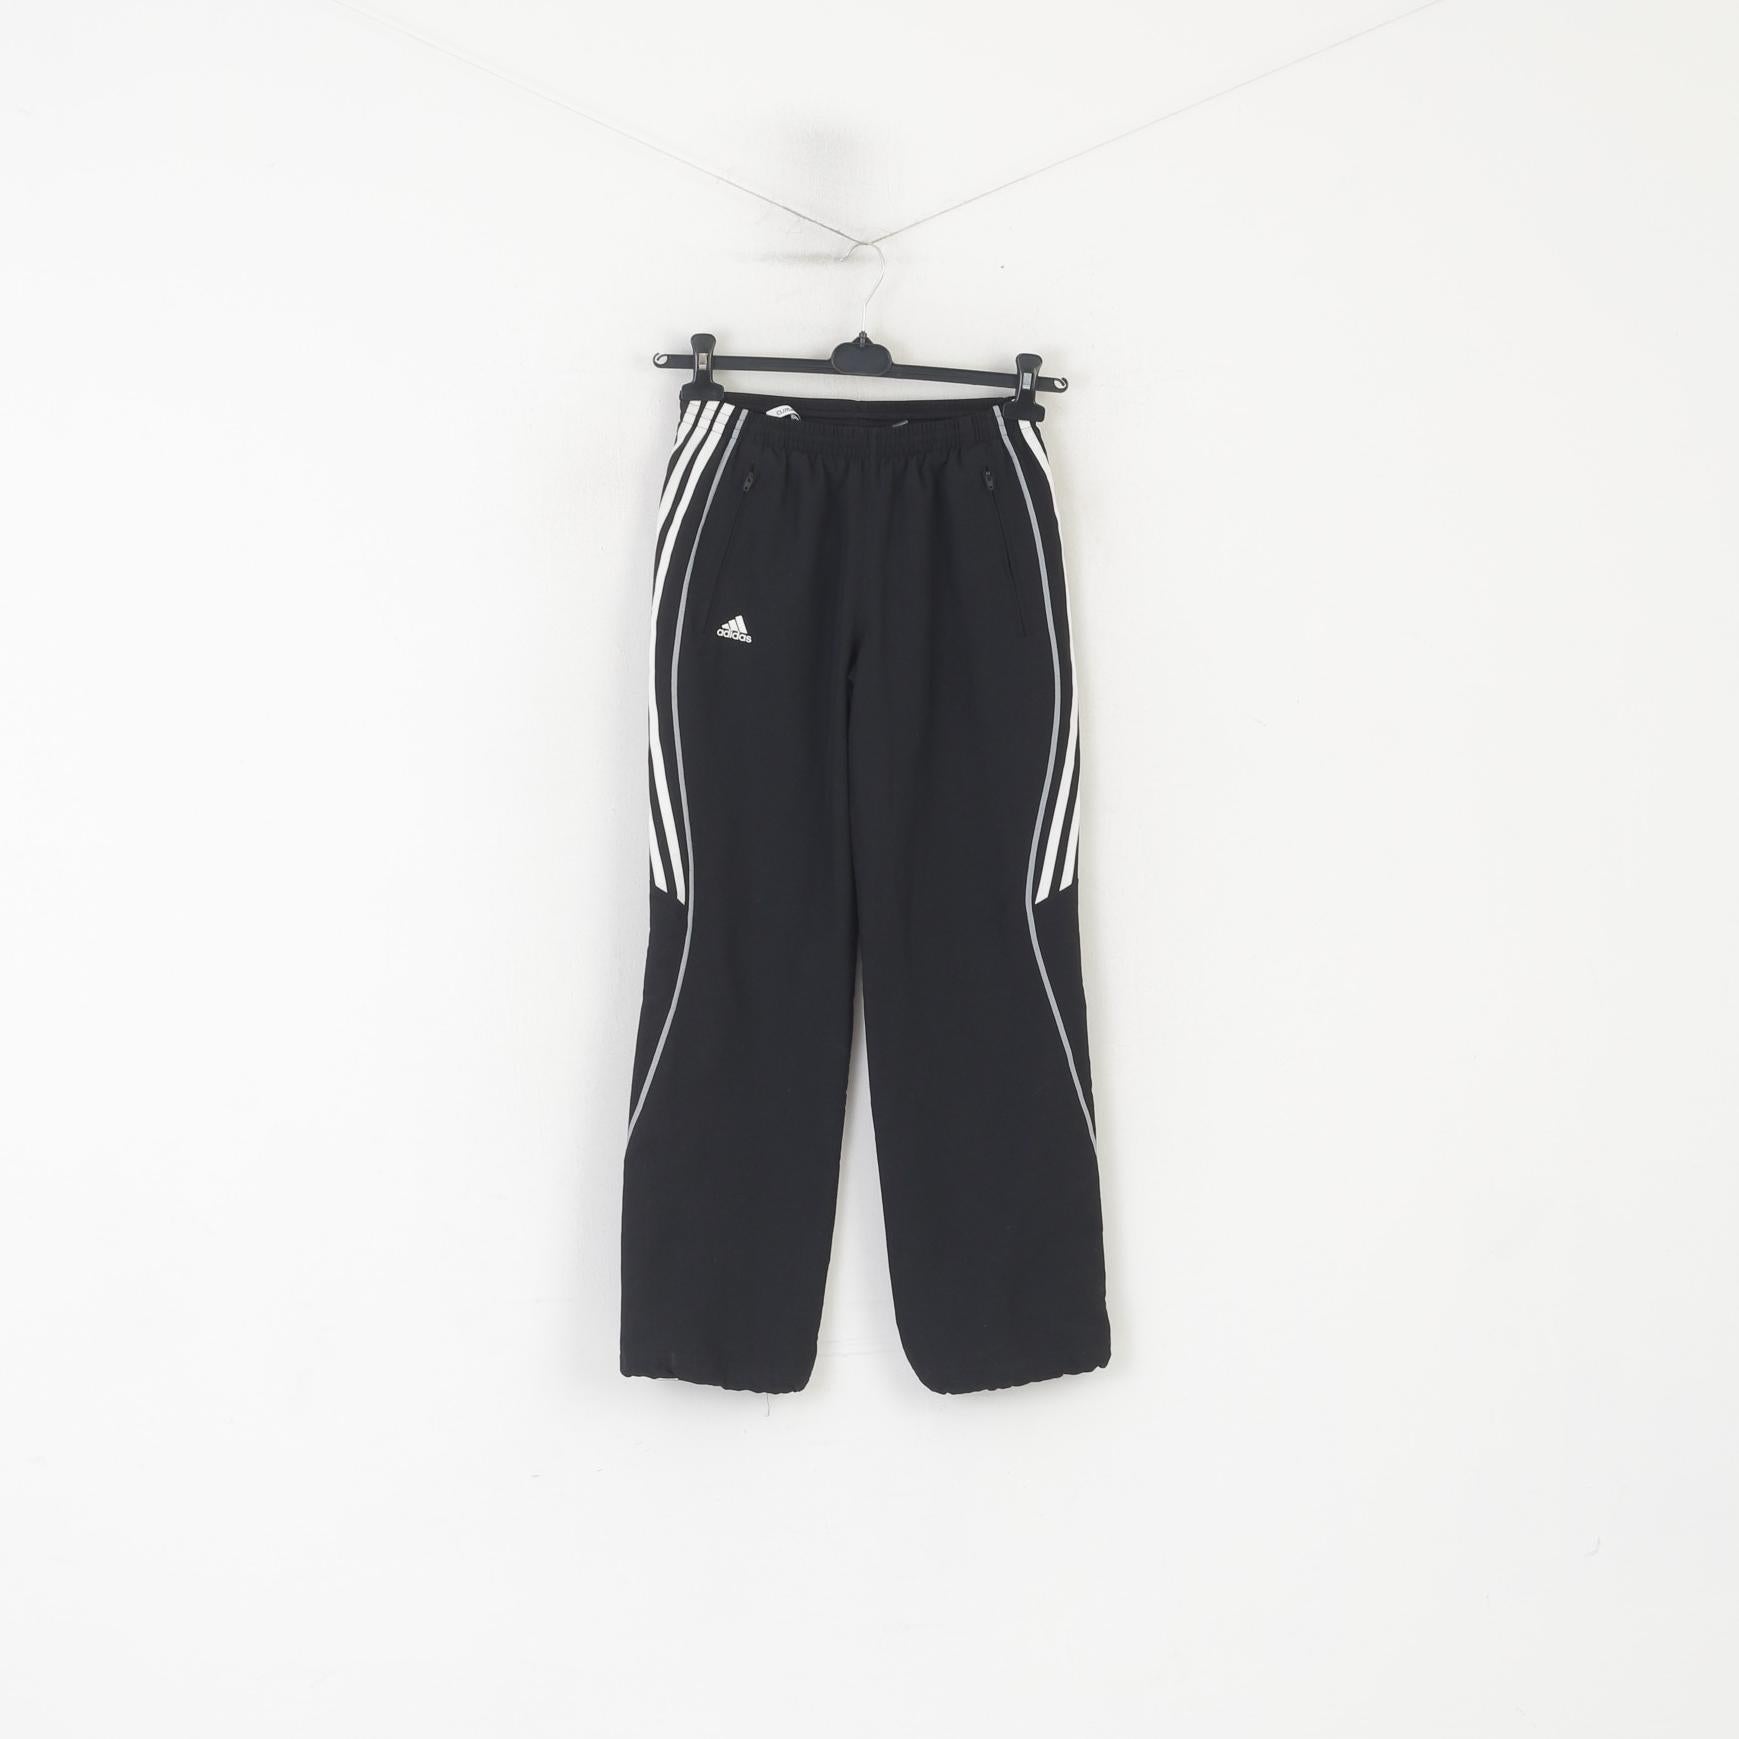 Adidas Boys 152 12 Age Trousers Black Polyester Climalite Active